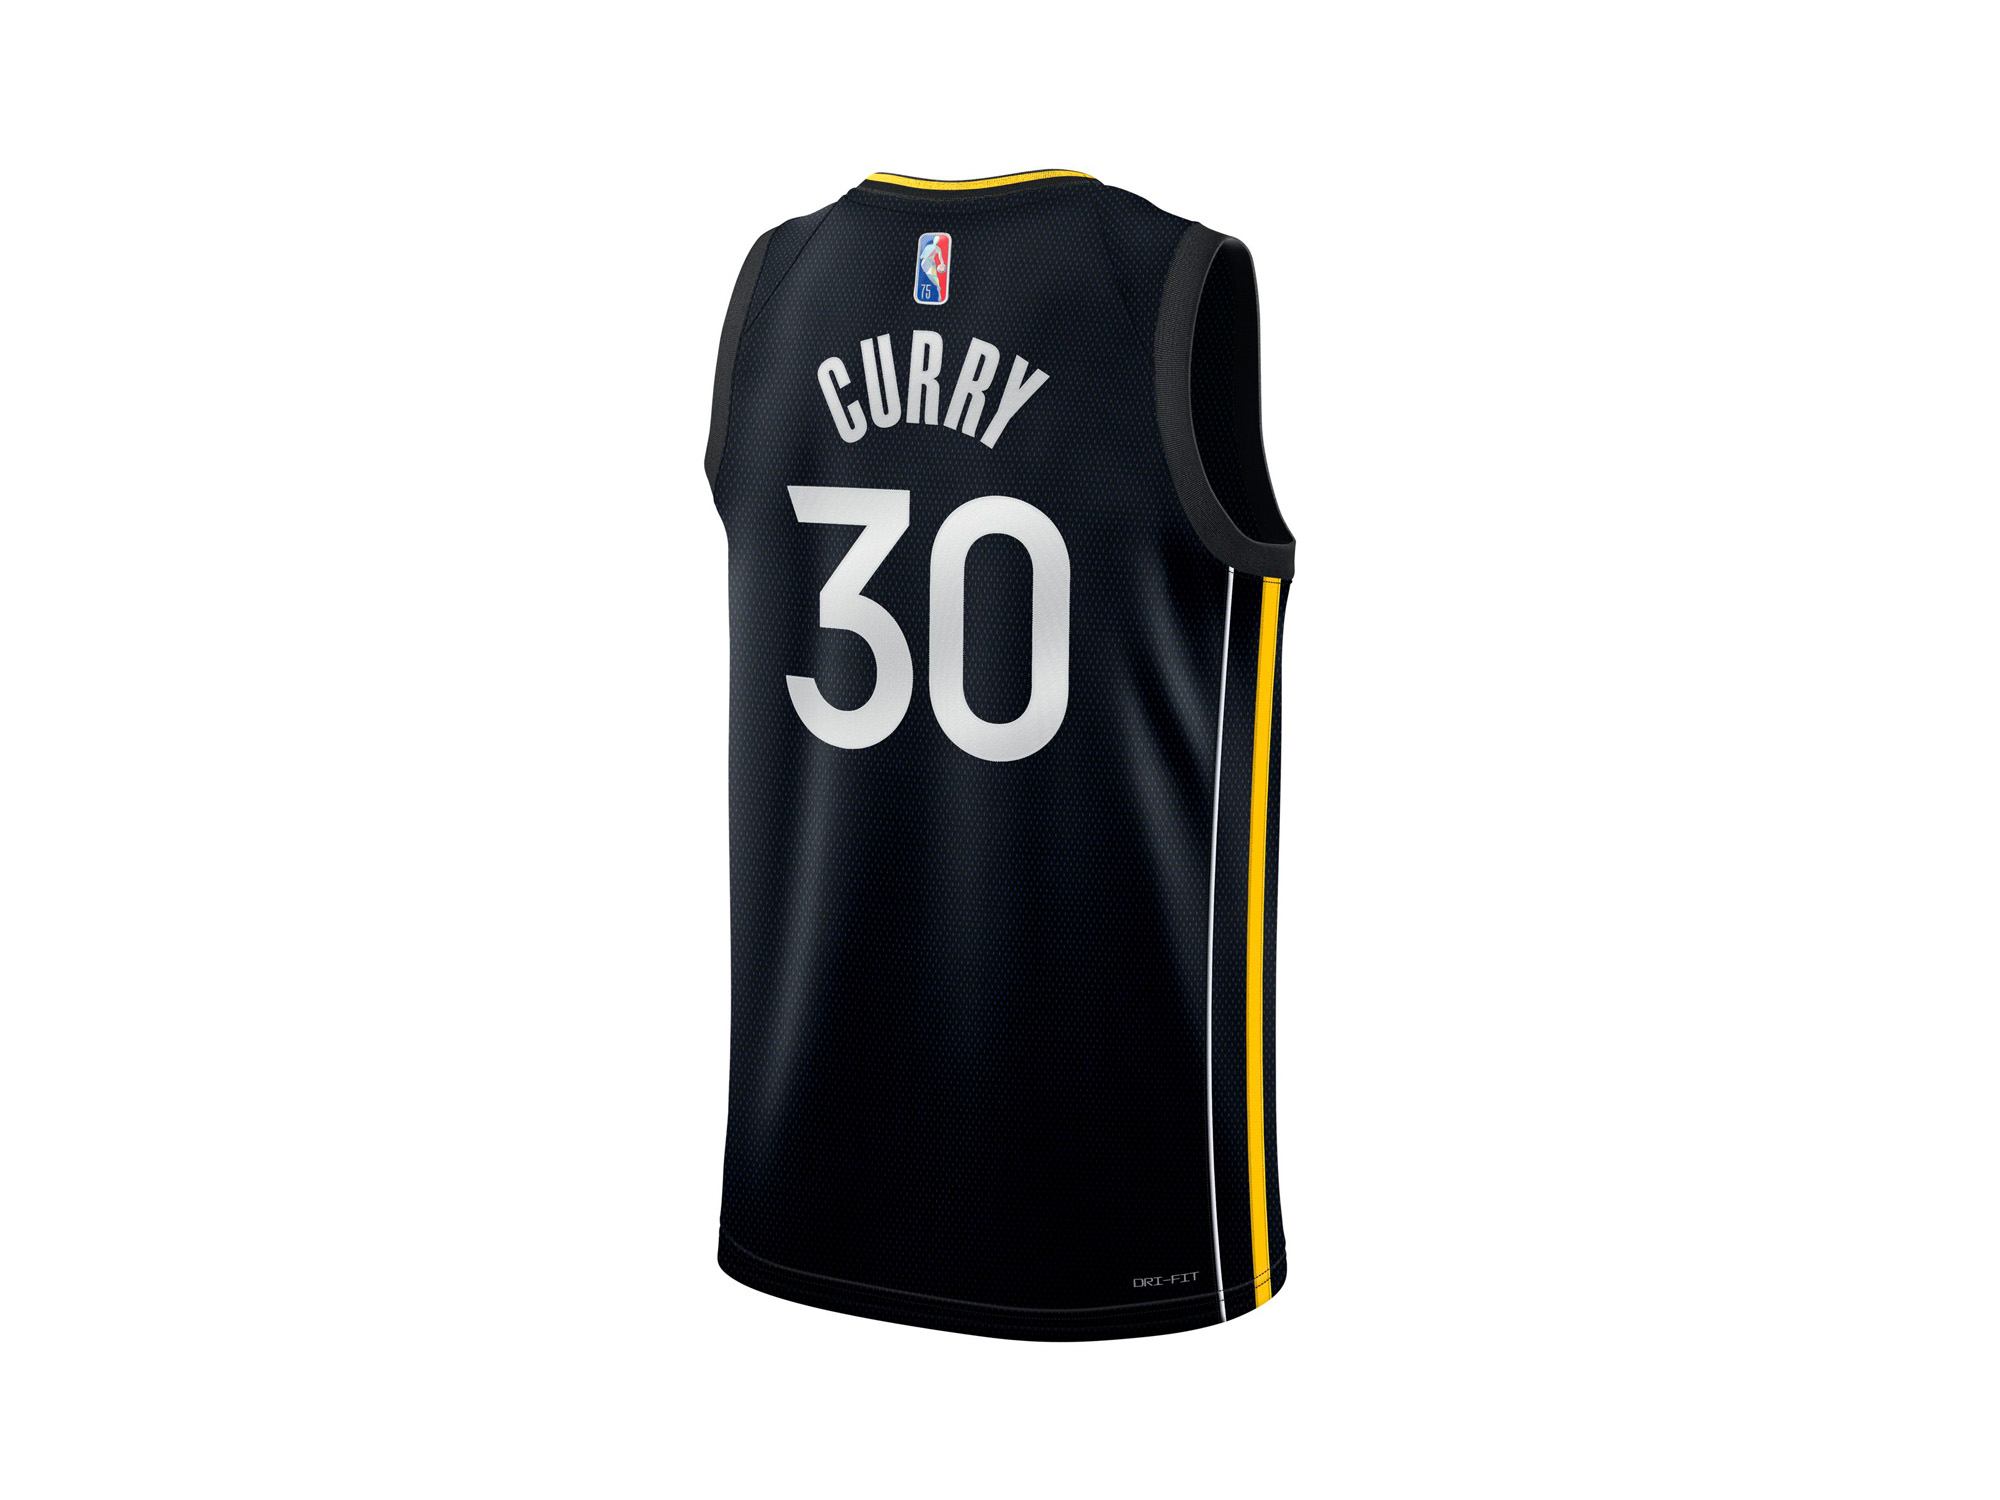 Nike Steph Curry MVP Edition Jersey